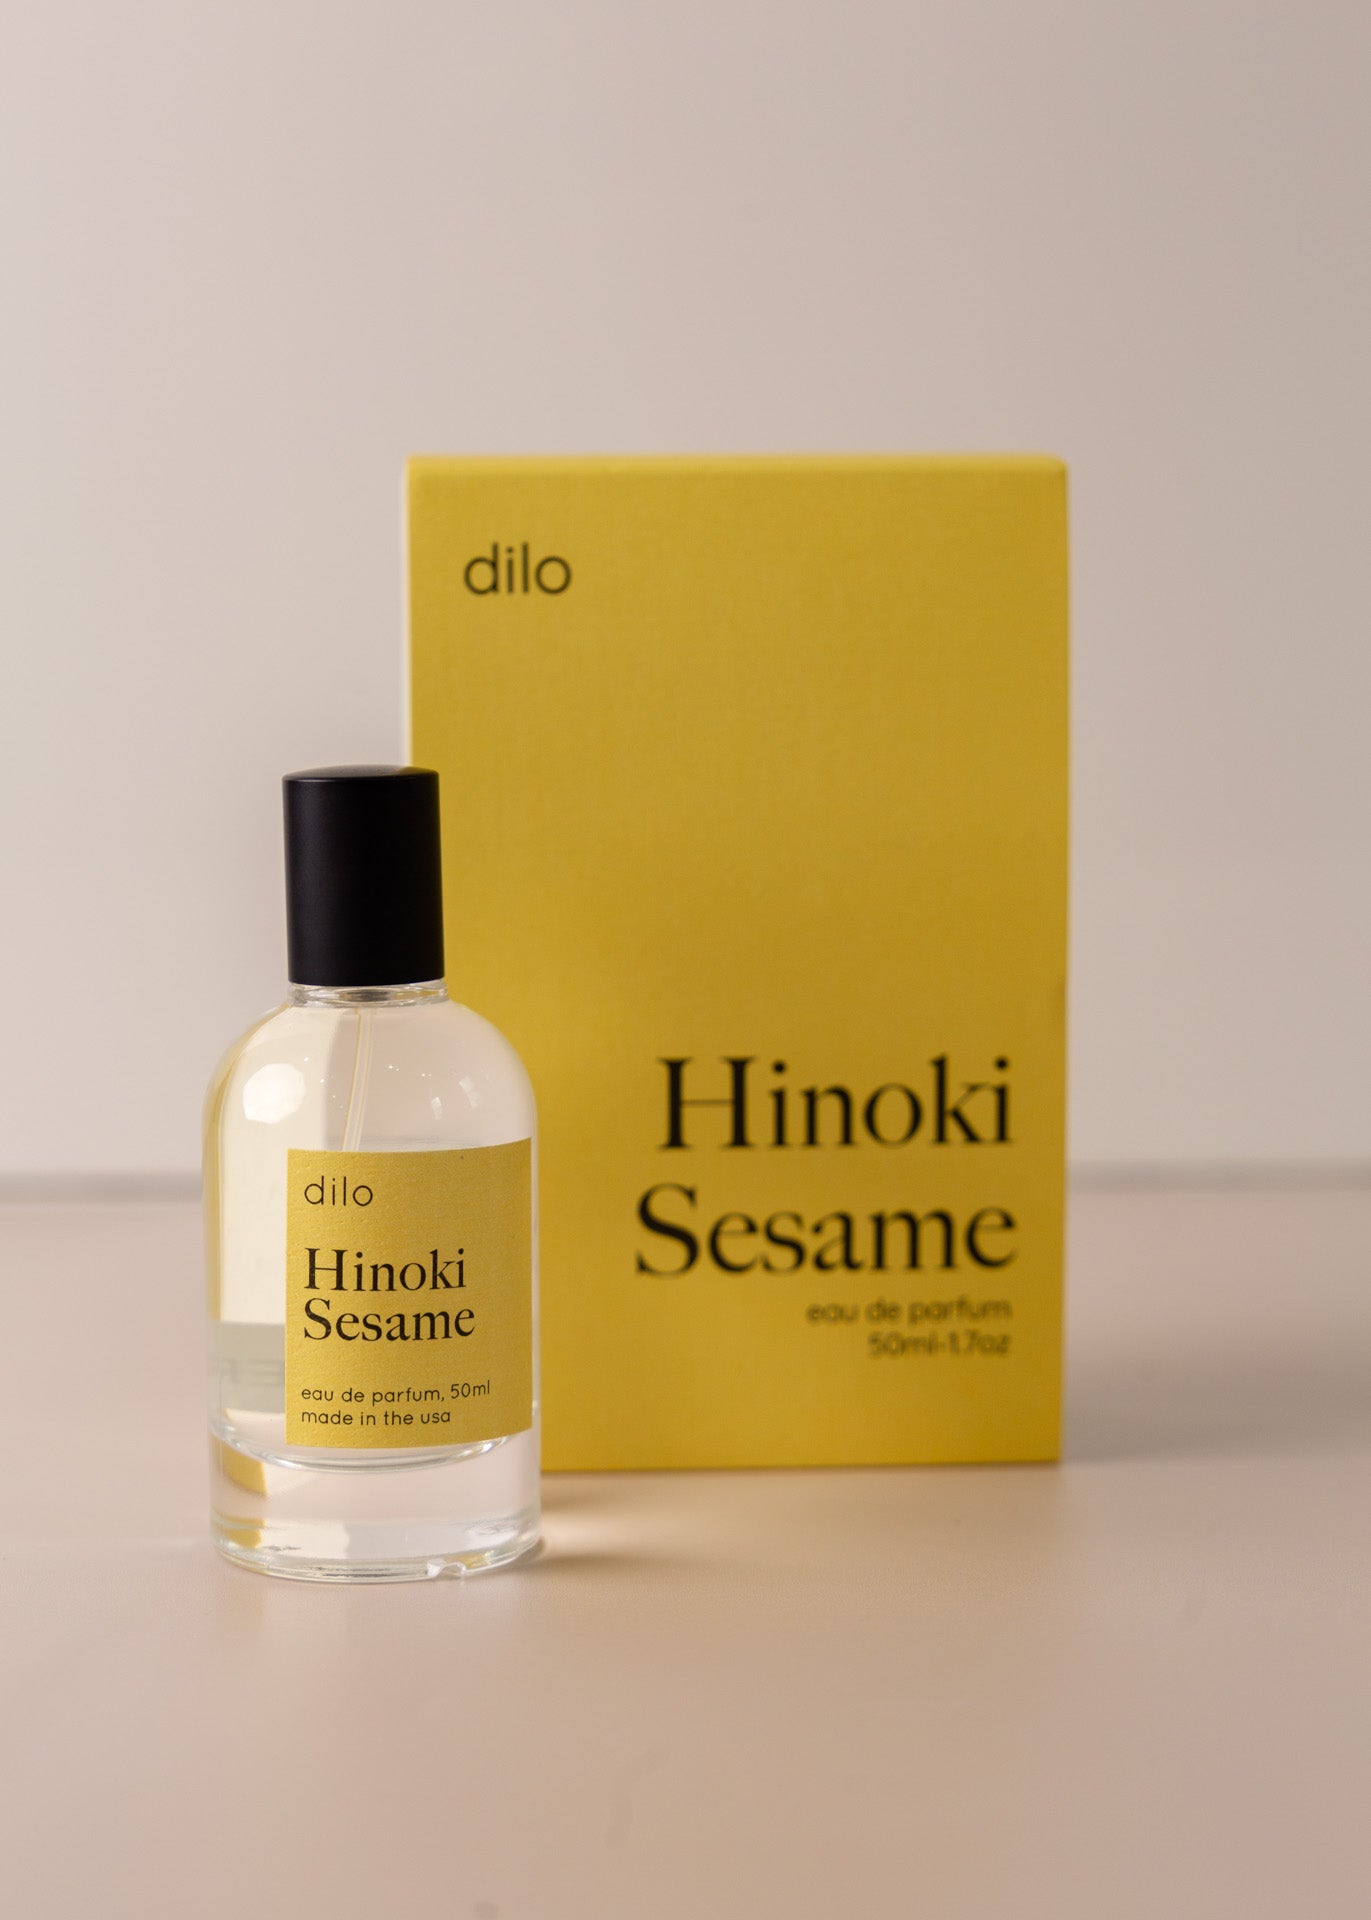 Bottle of perfume by dilo, with a yellow label on the front stating &quot;hinoki sesame. eau de parfum, 50 ml. made in the usa&quot; with the yellow box that it comes in in the background